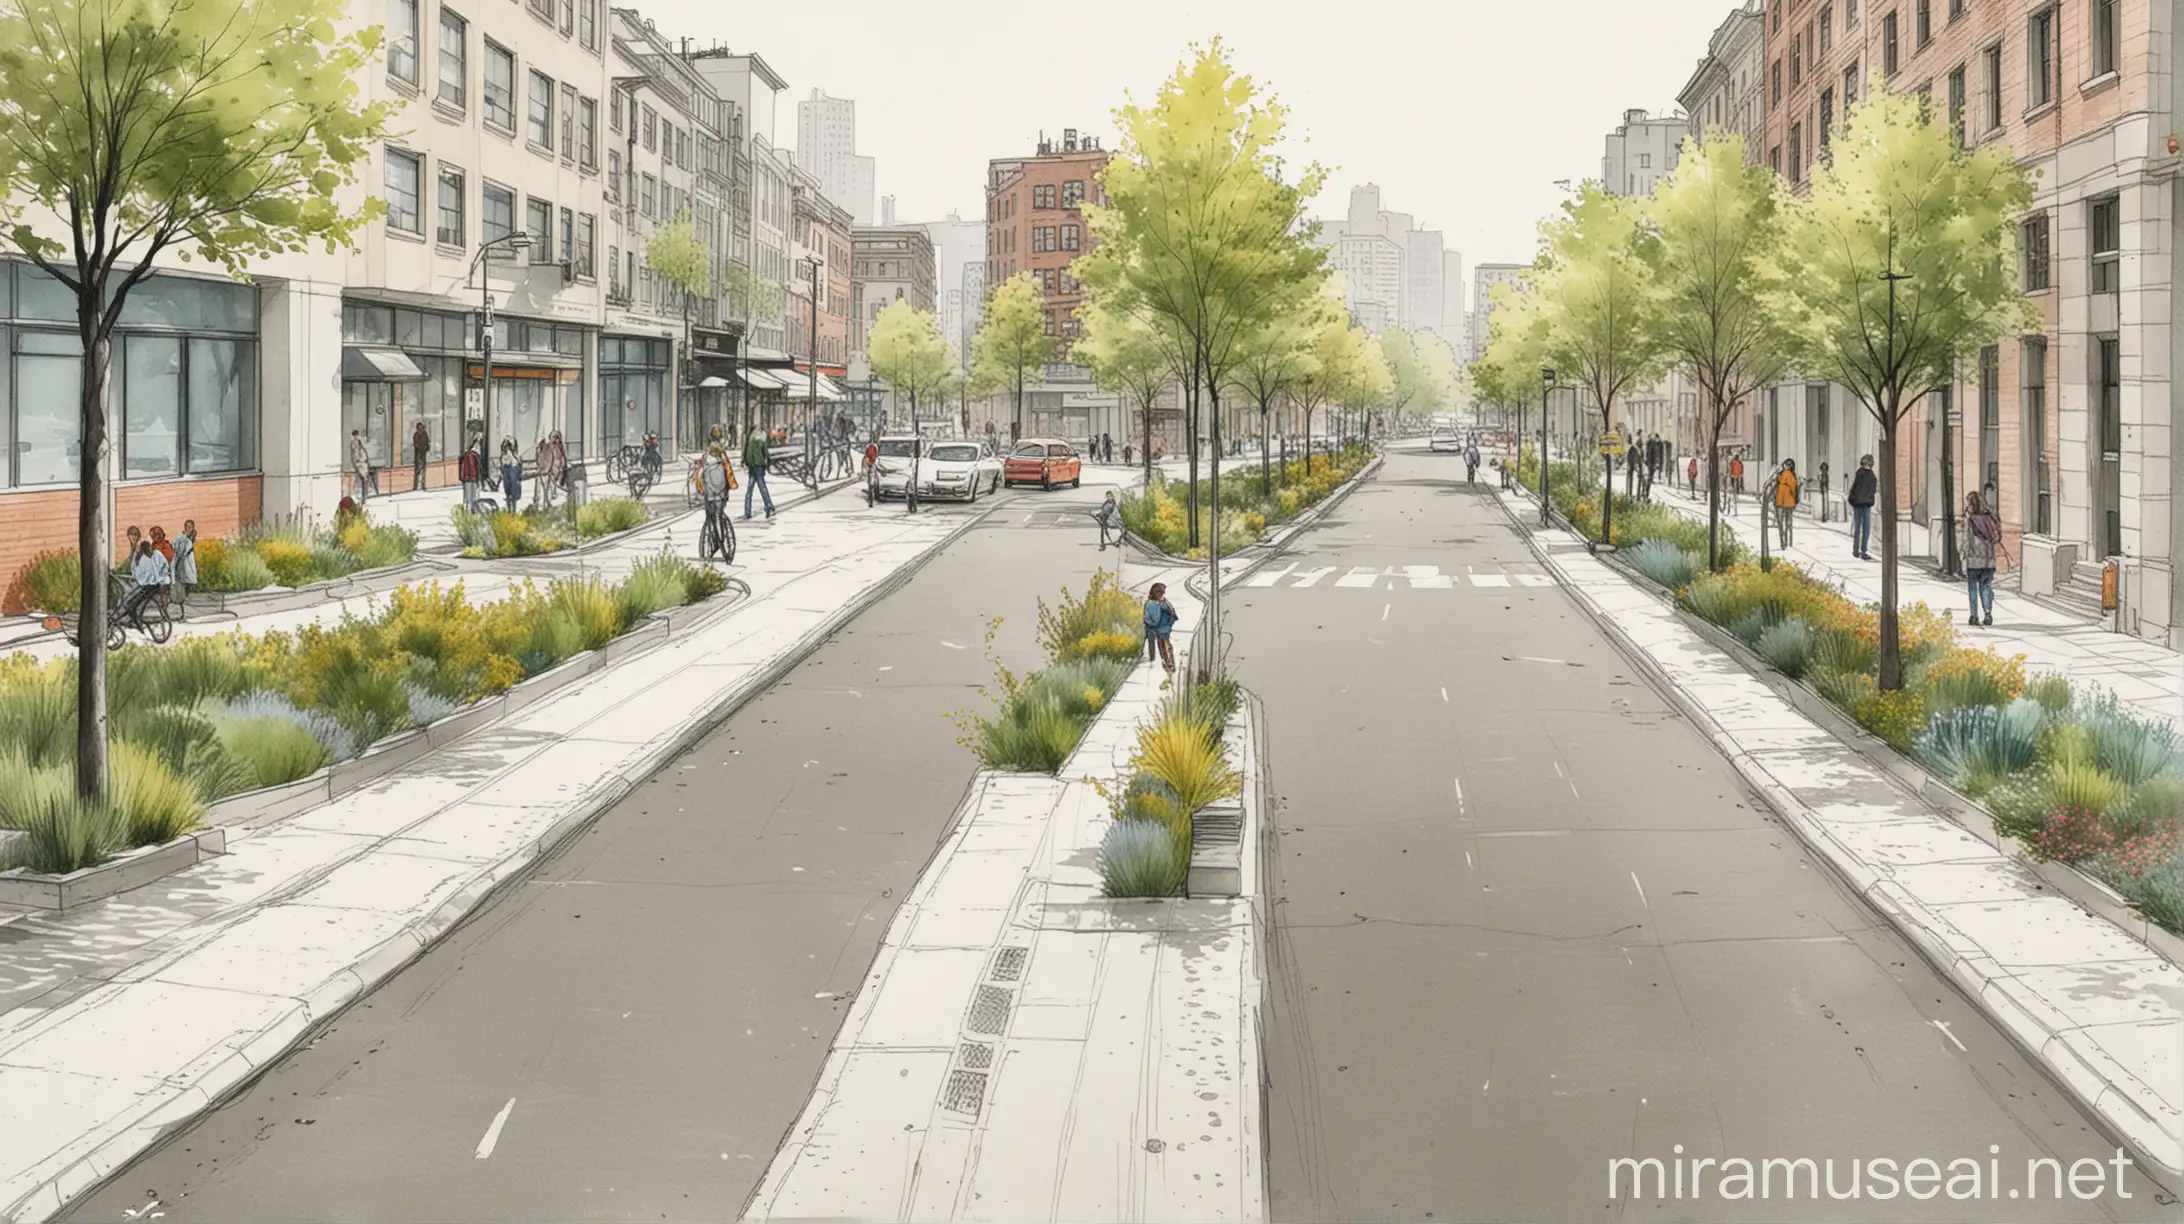 Urban Streetscape and Sidewalk Design Sketches New Urbanism and Resilient City Concepts